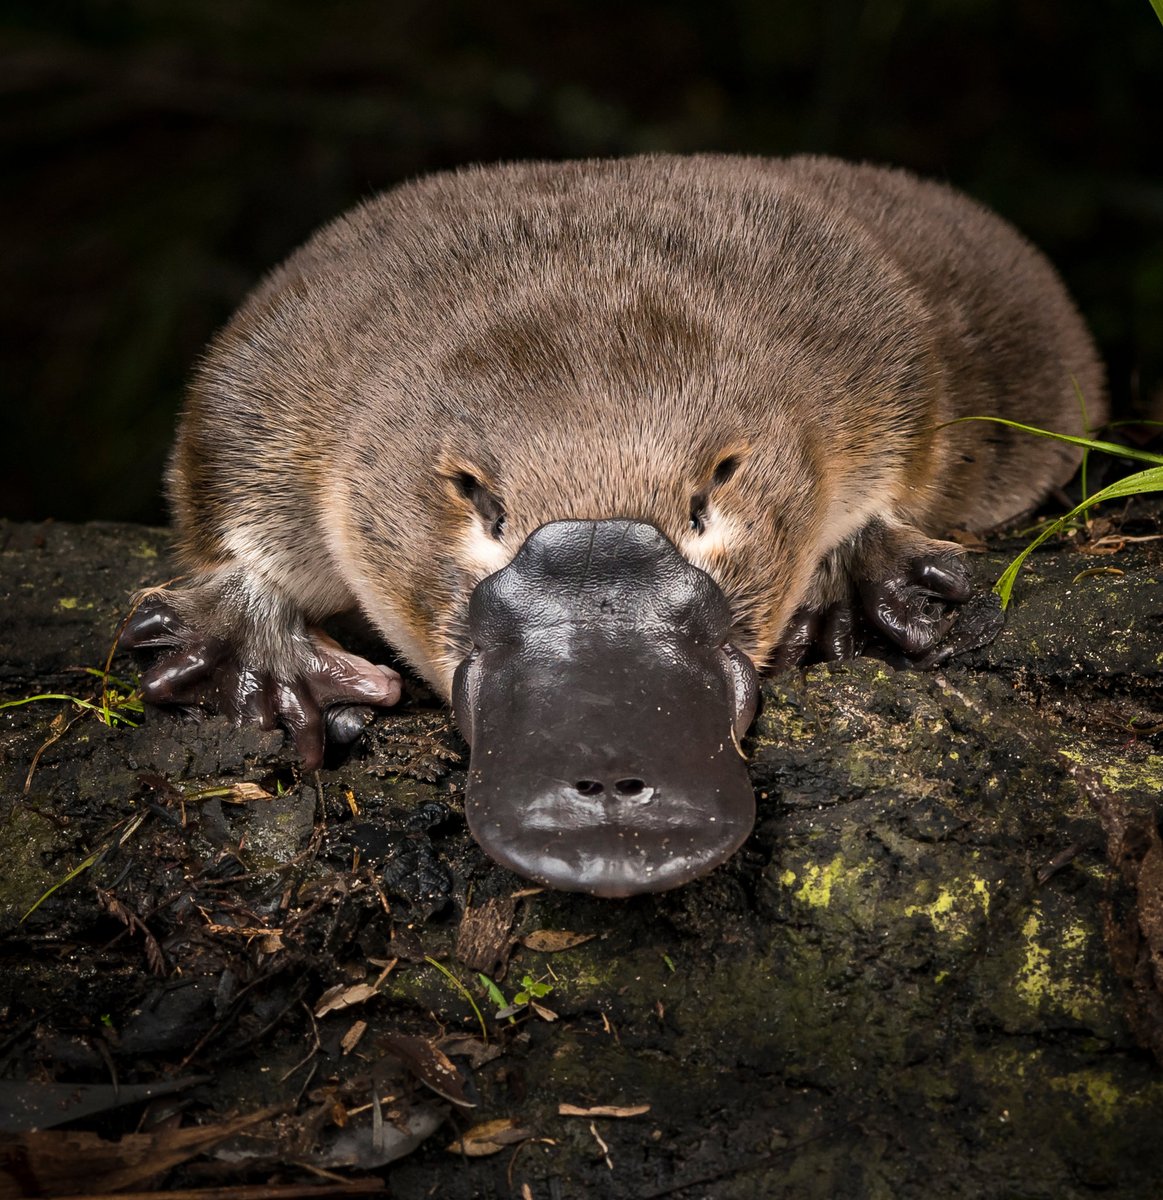 The platypus is carnivorous, eating a diet of worms, shrimp, crayfish, and insect larvae. 2/16